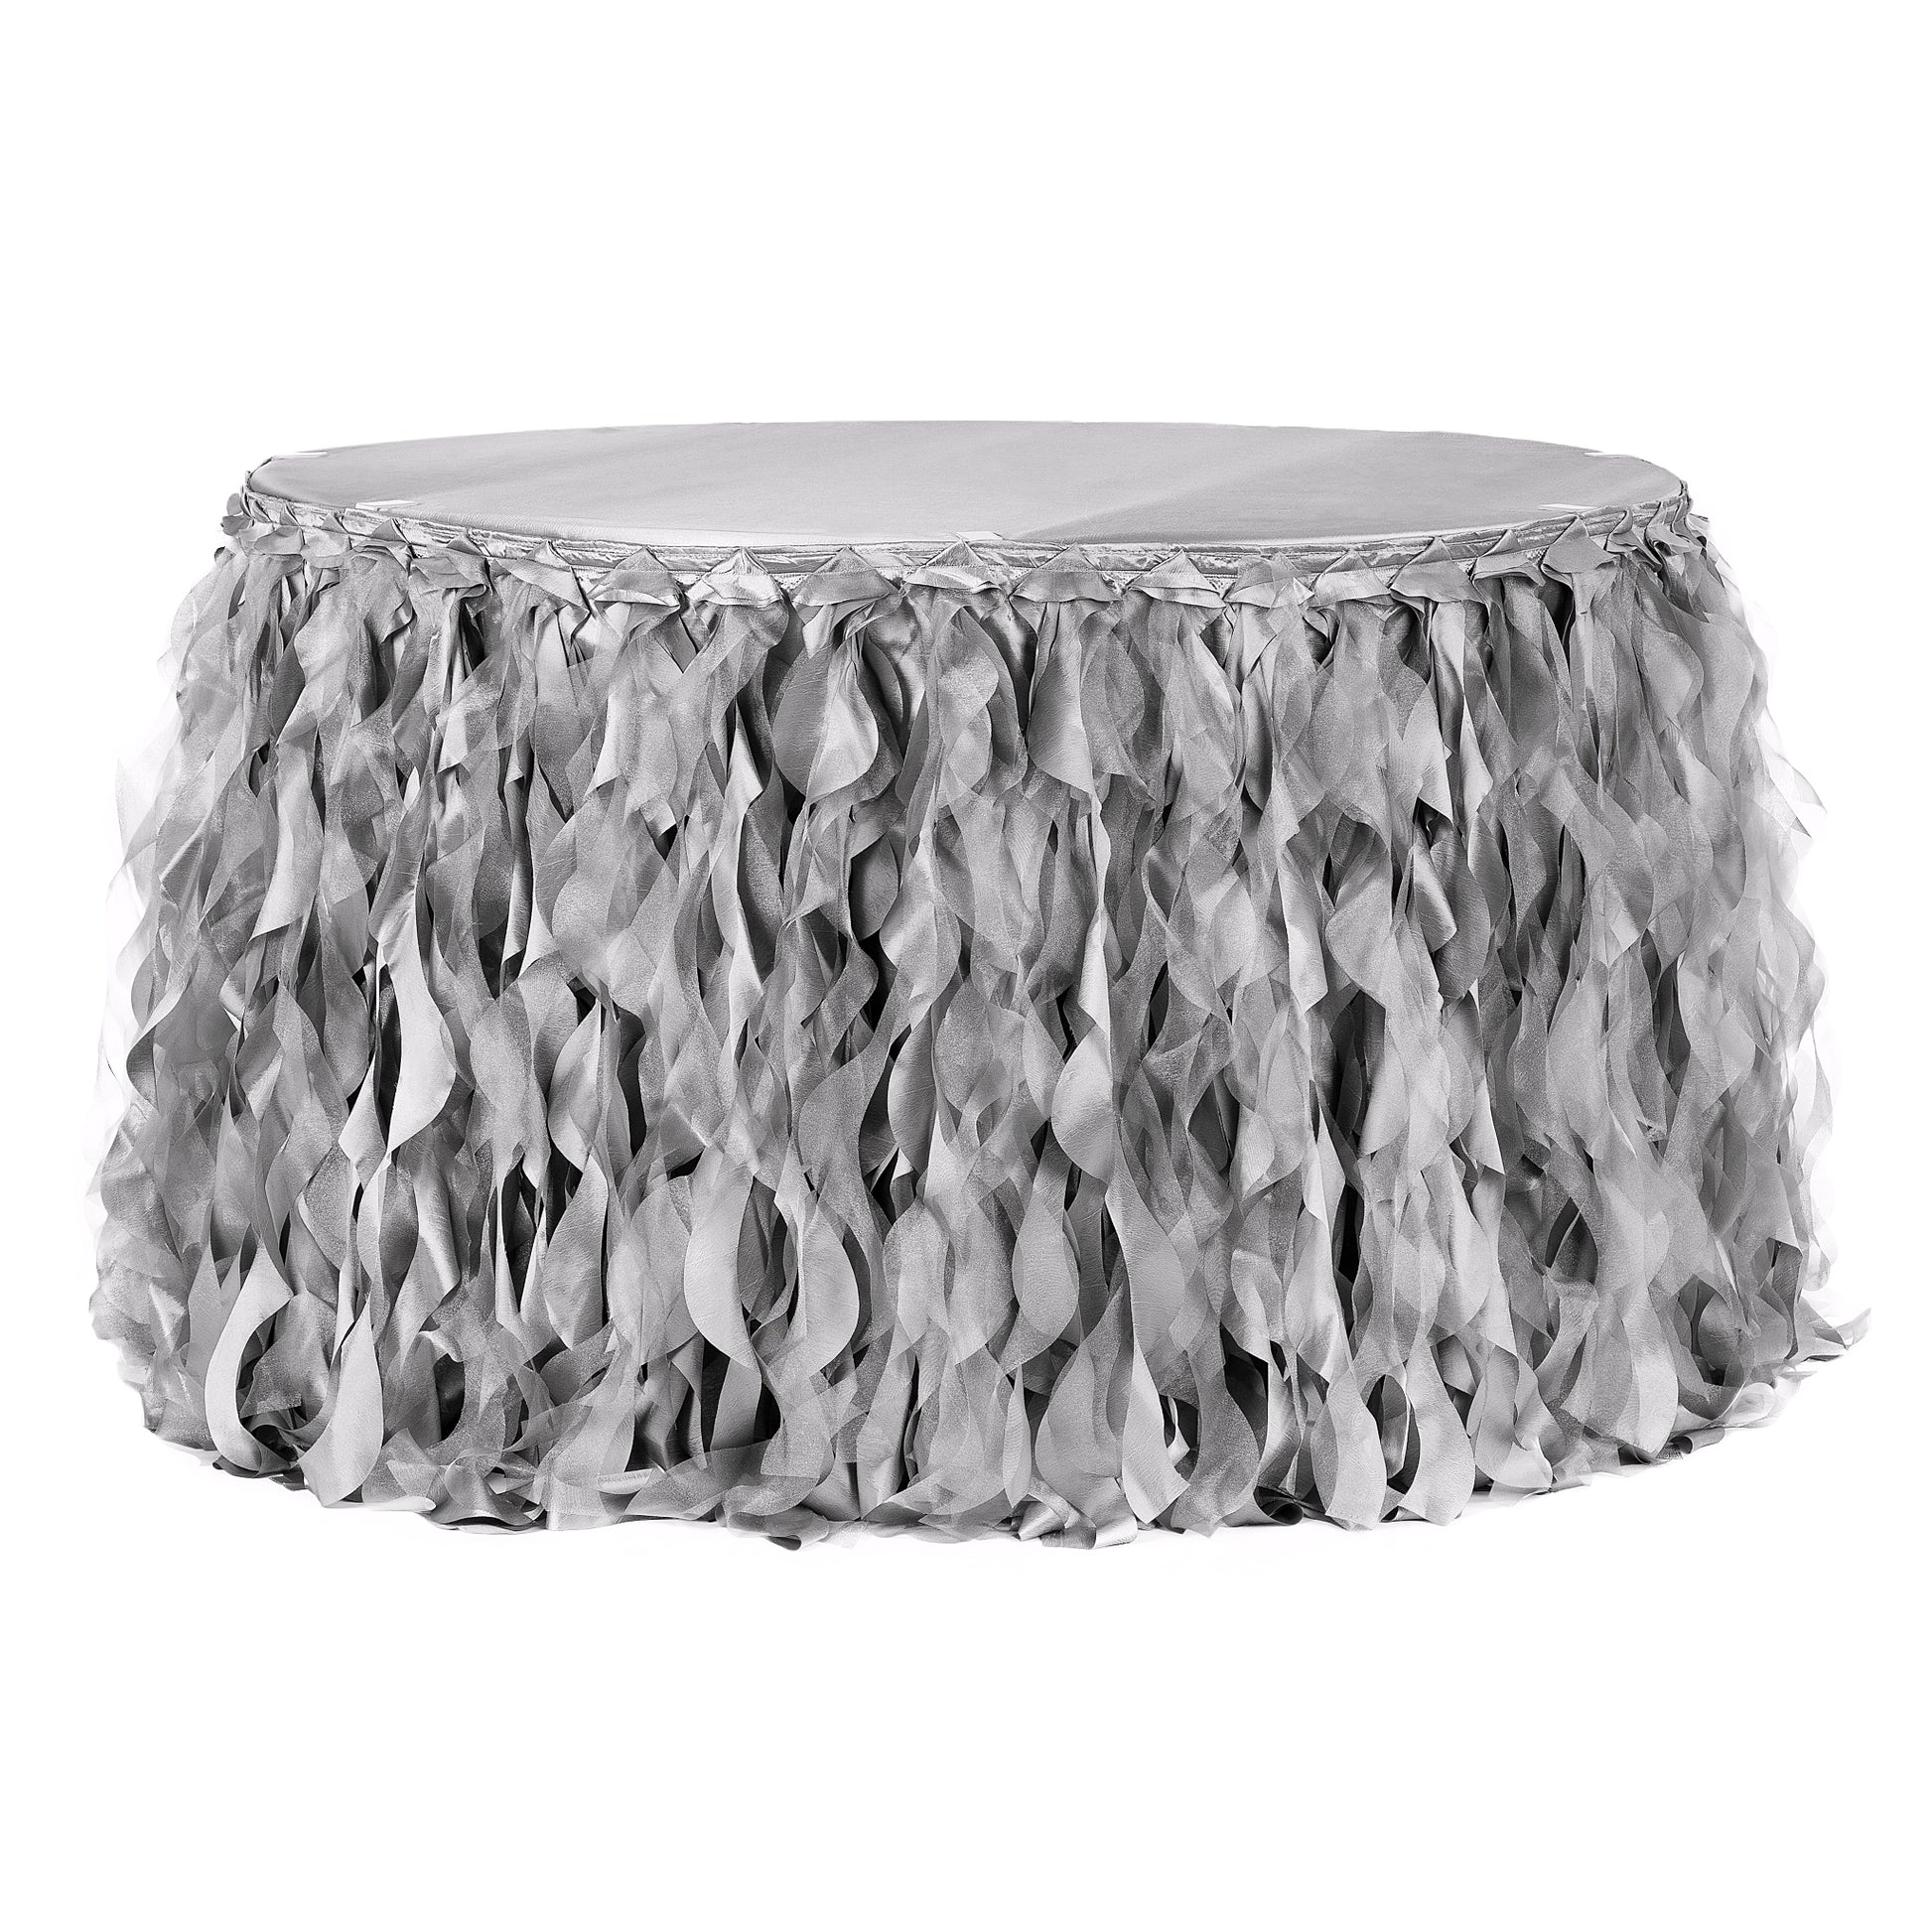 Curly Willow 14ft Table Skirt - Silver - CV Linens